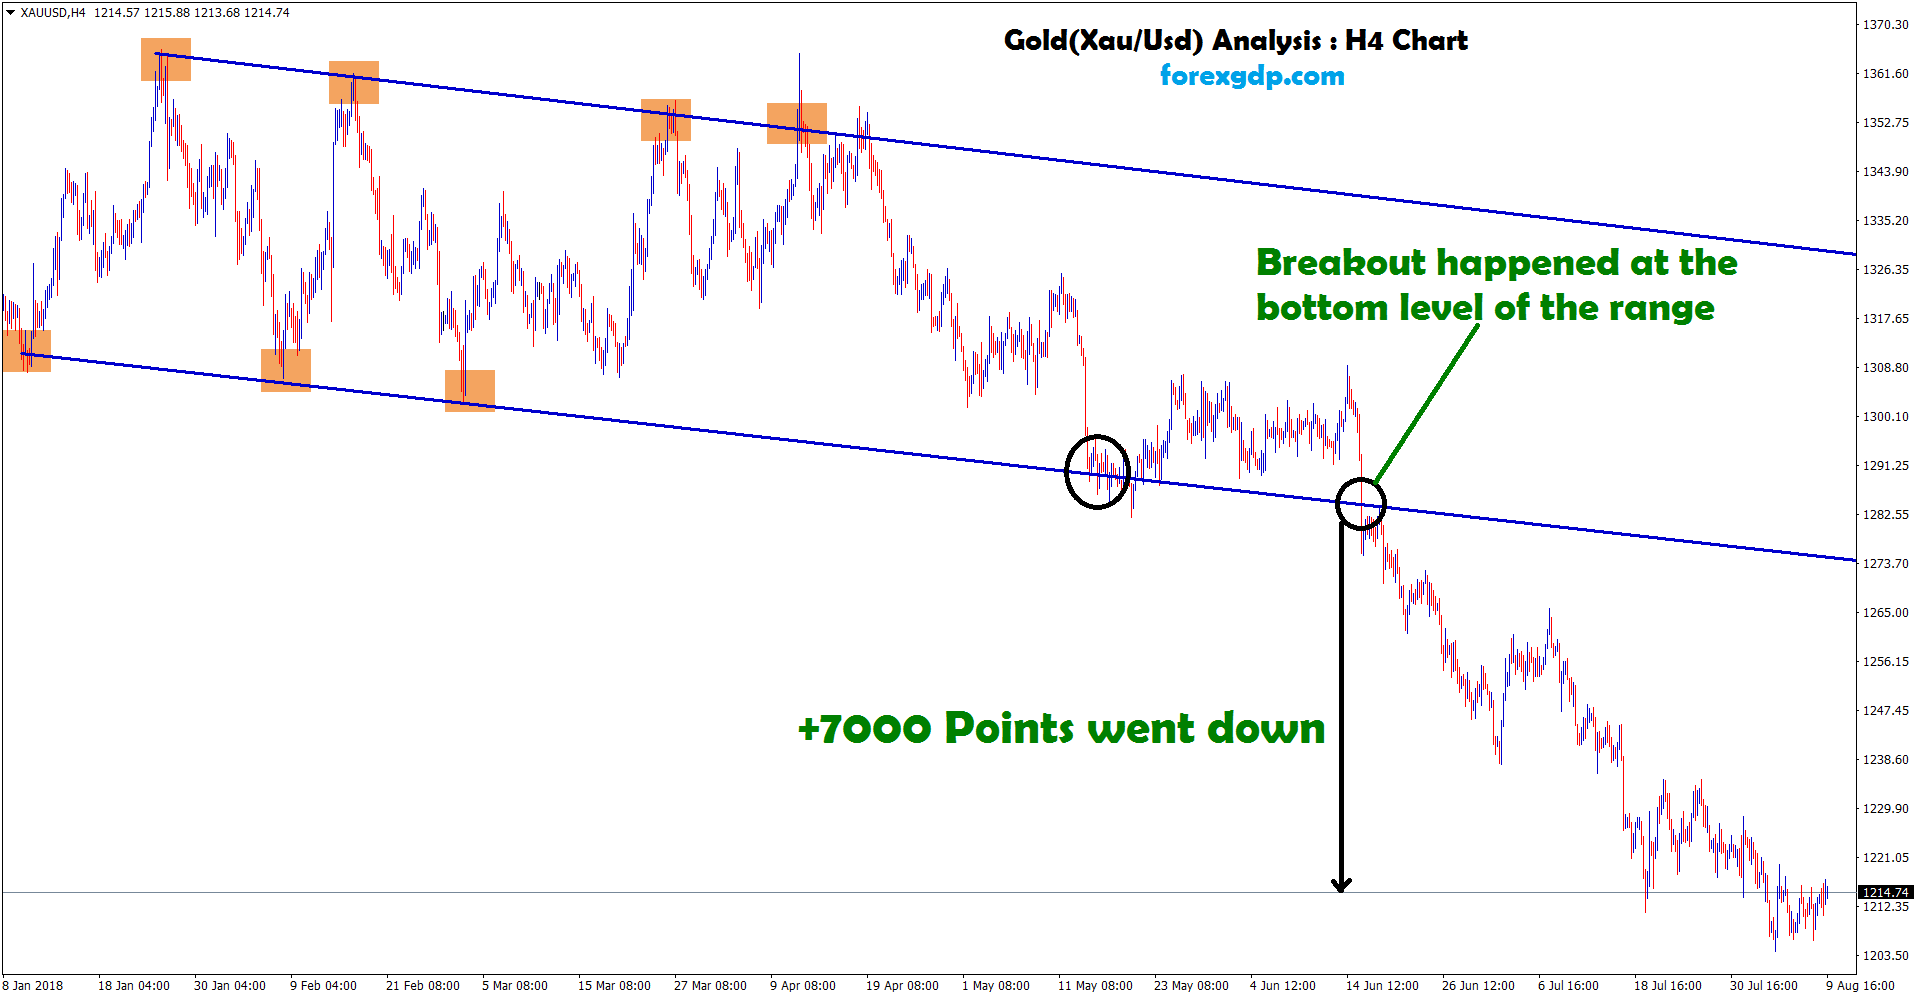 gold went down upto +7000 points after breakout